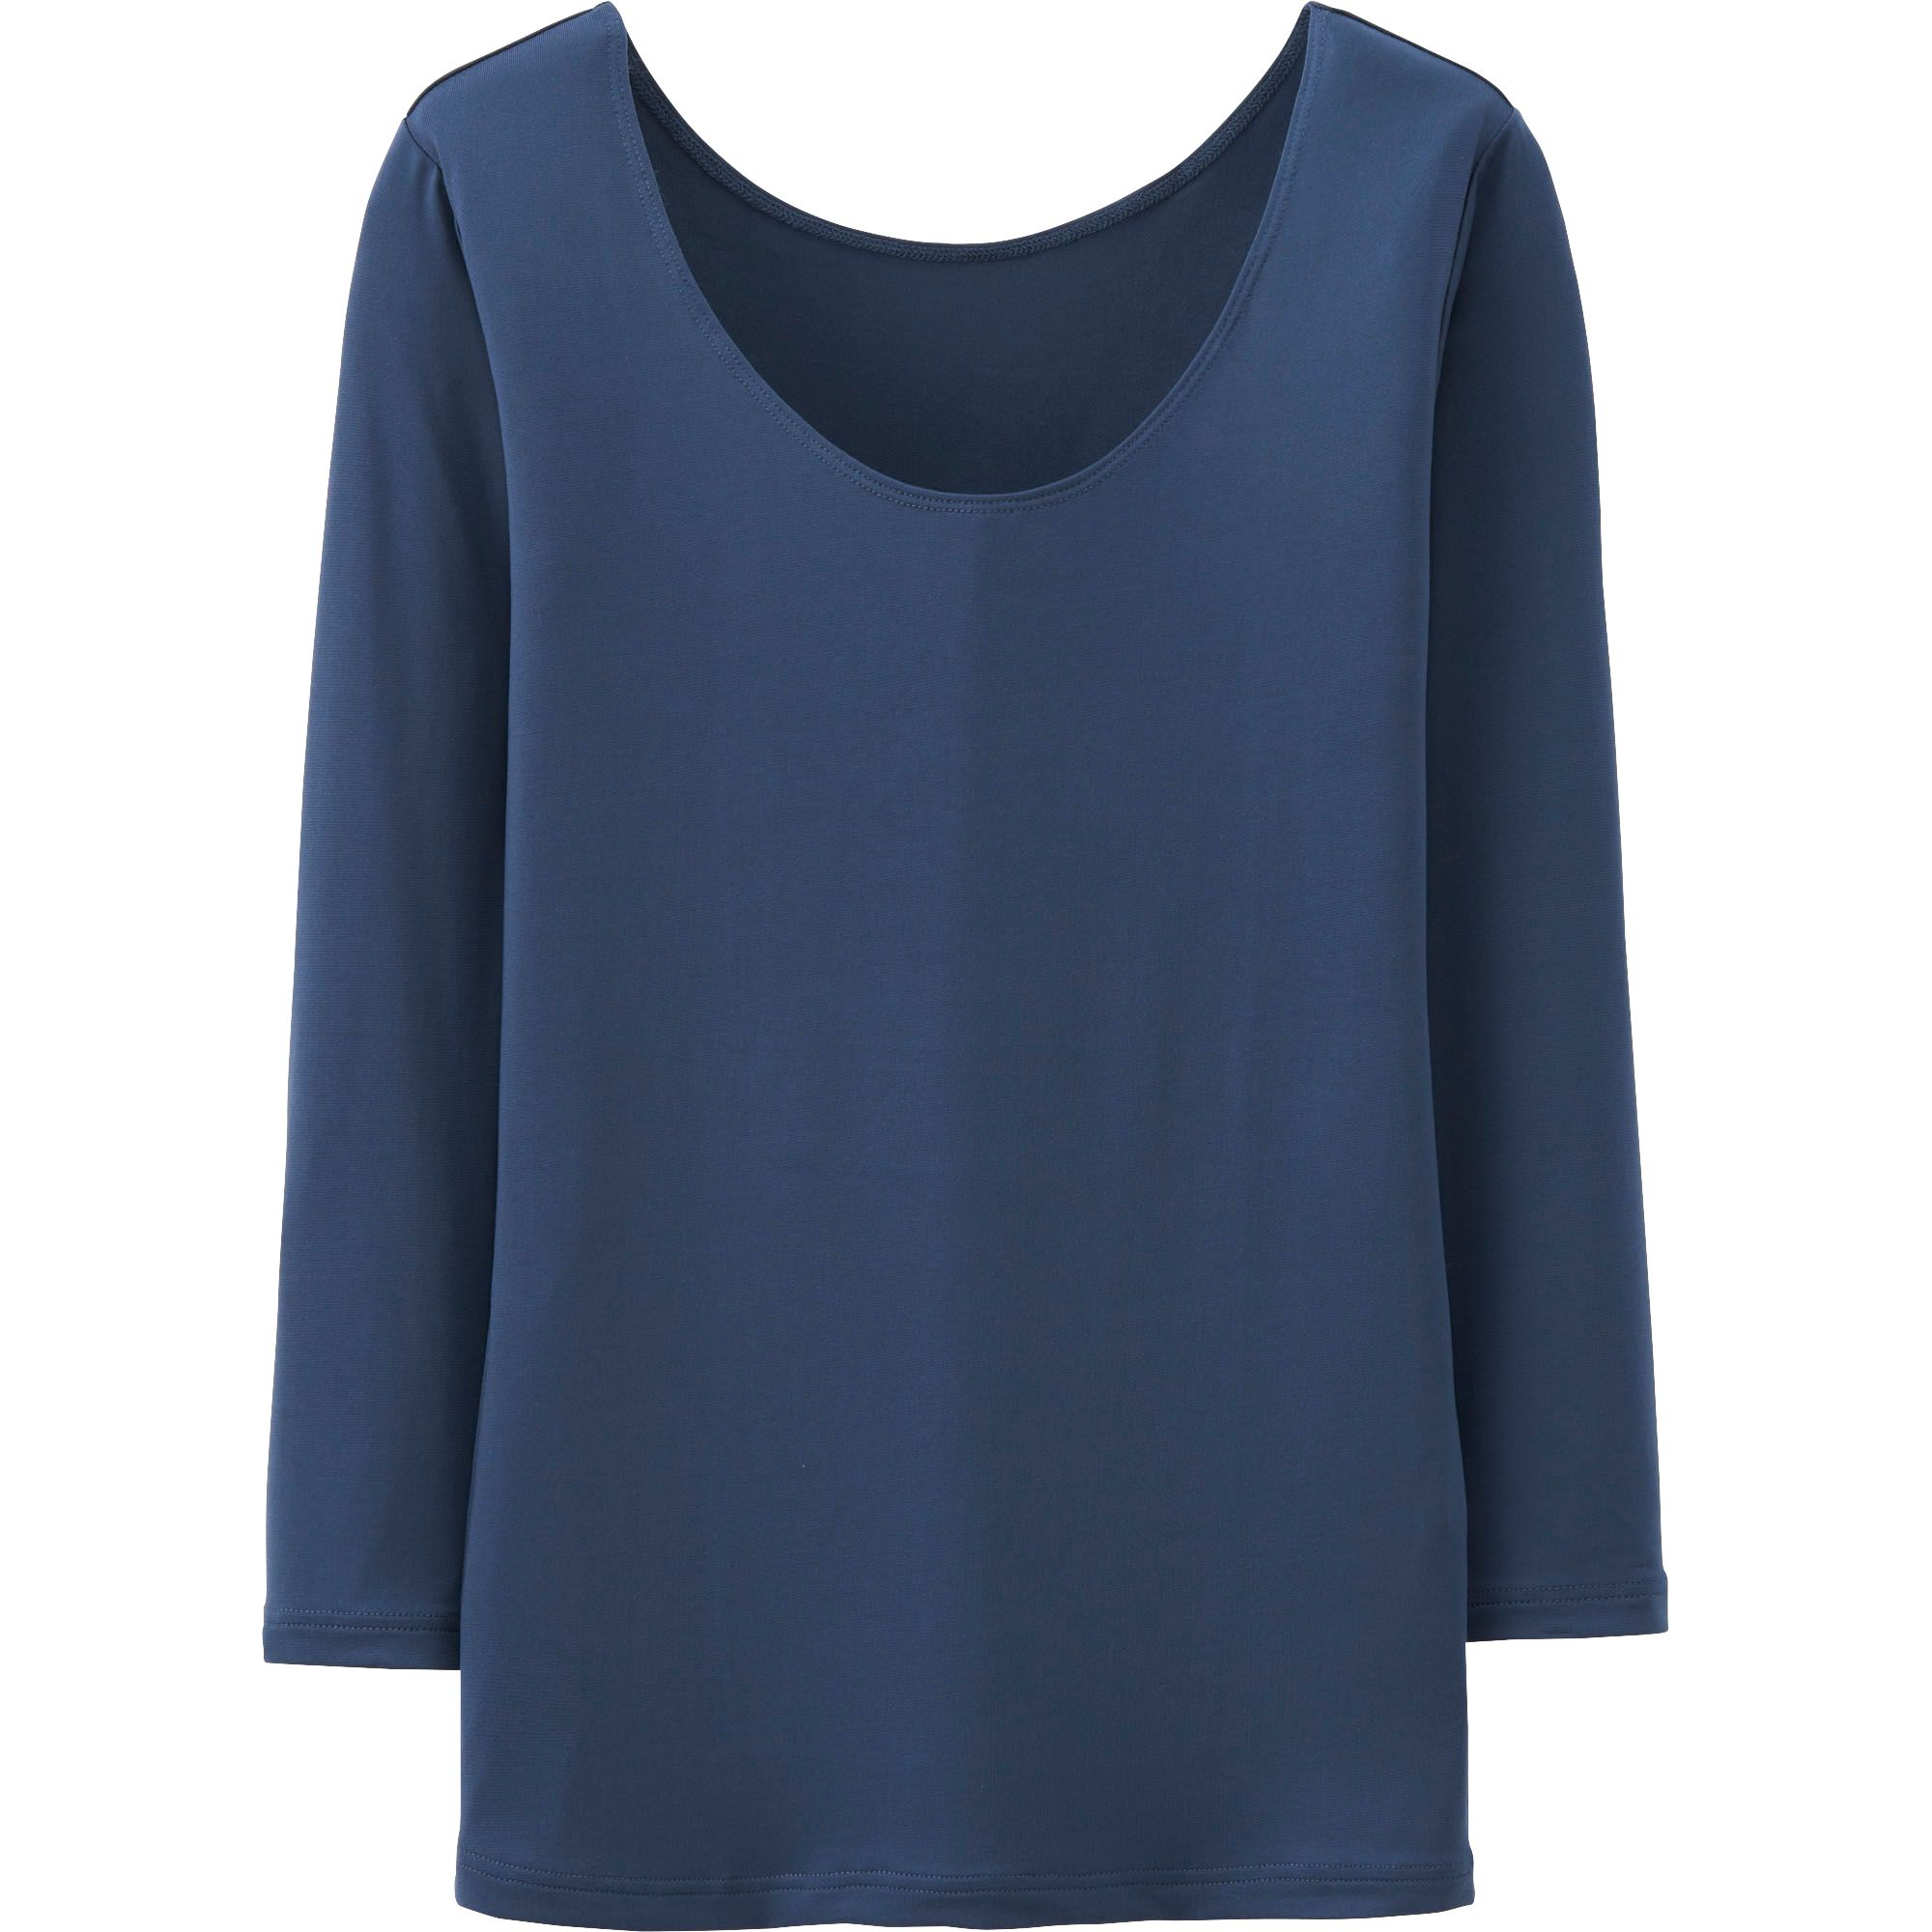 Uniqlo Women Airism Scoop Neck 3/4 Sleeve T-Shirt in Blue (NAVY) | Lyst